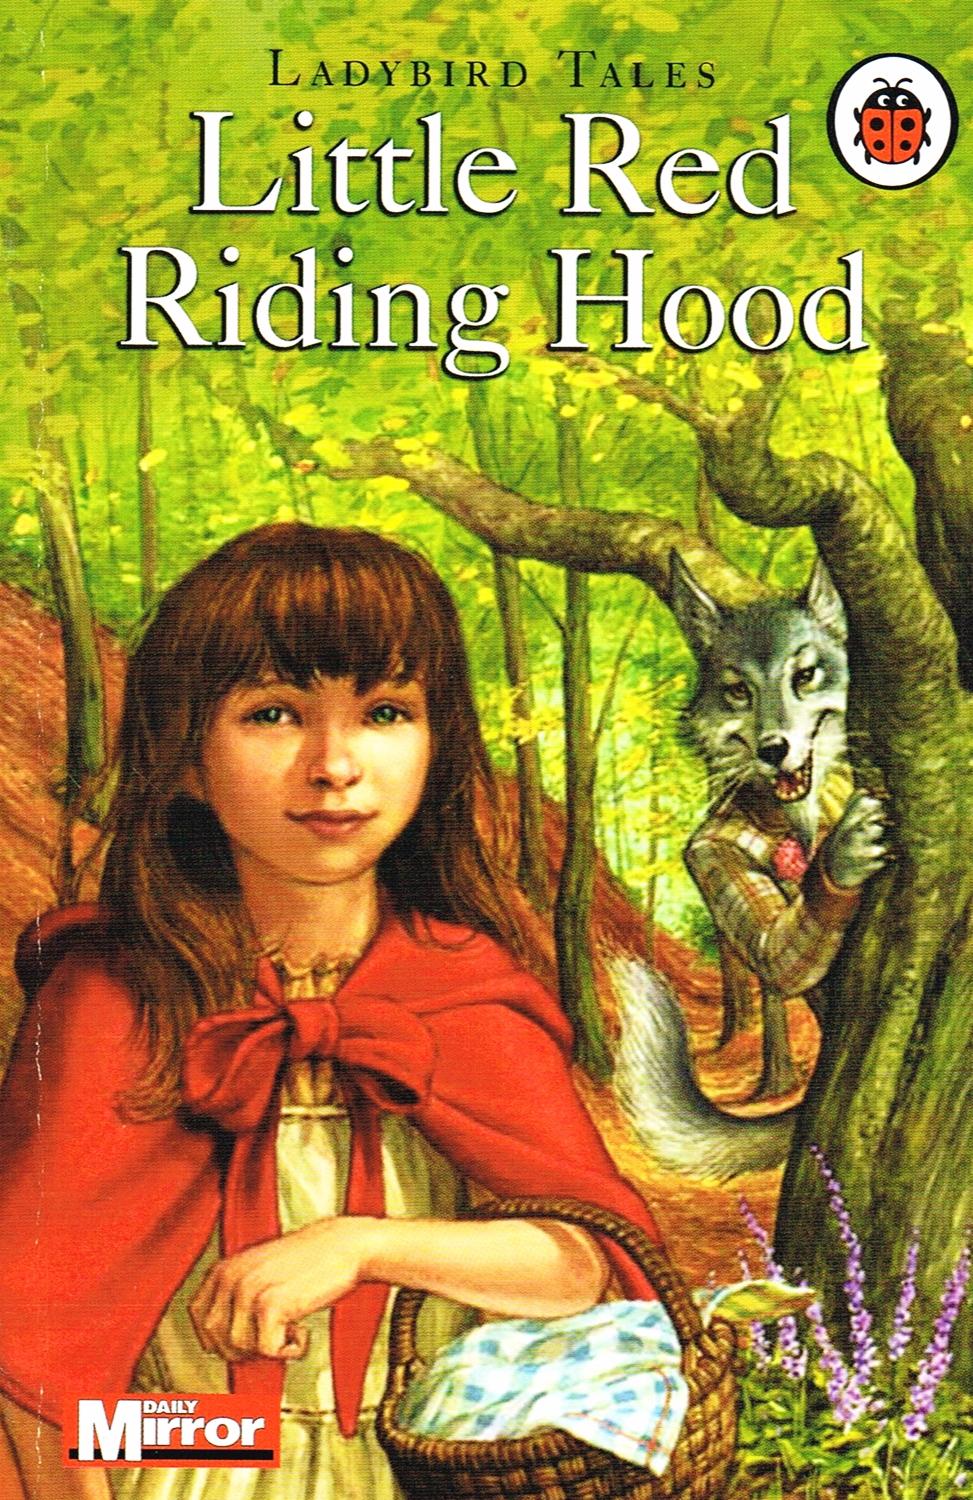 Little Red Riding Hood By Traditional Retold Editor Vera Southgate Illustrator Stephen Player New Soft Cover 05 1st Edition Sapphire Books